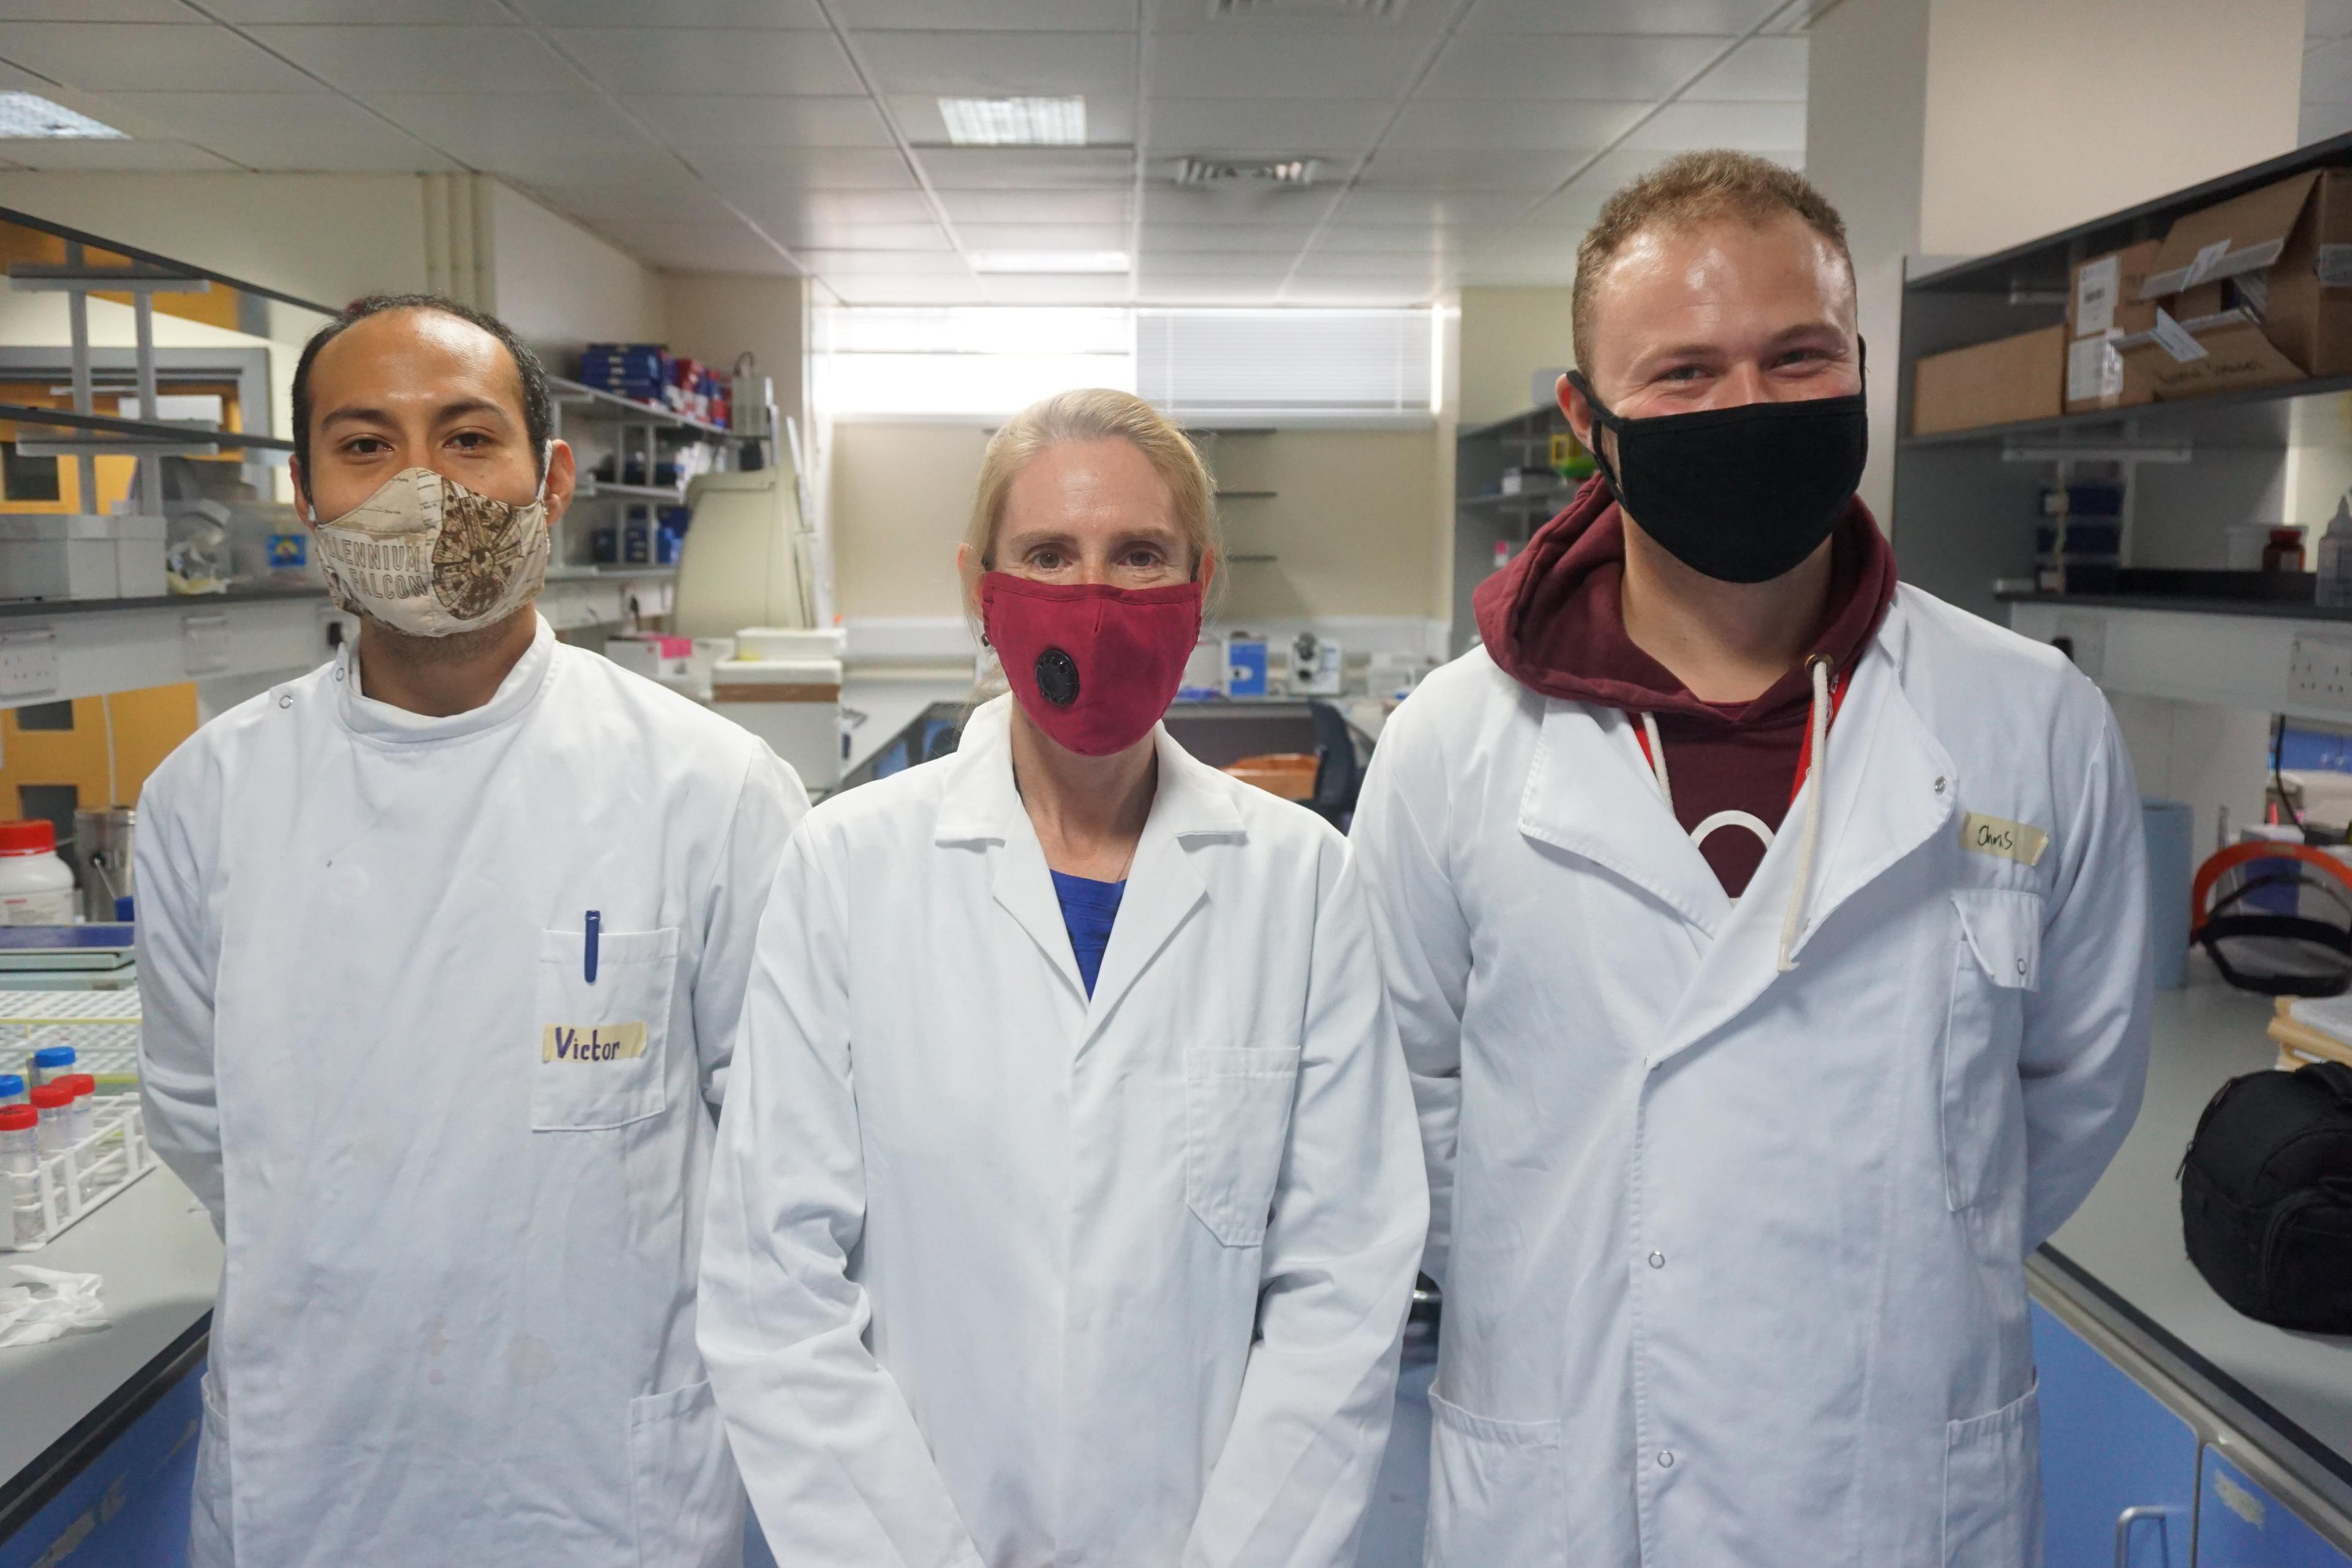 Three scientists wearing face masks and white lab coats are shown standing in a laboratory